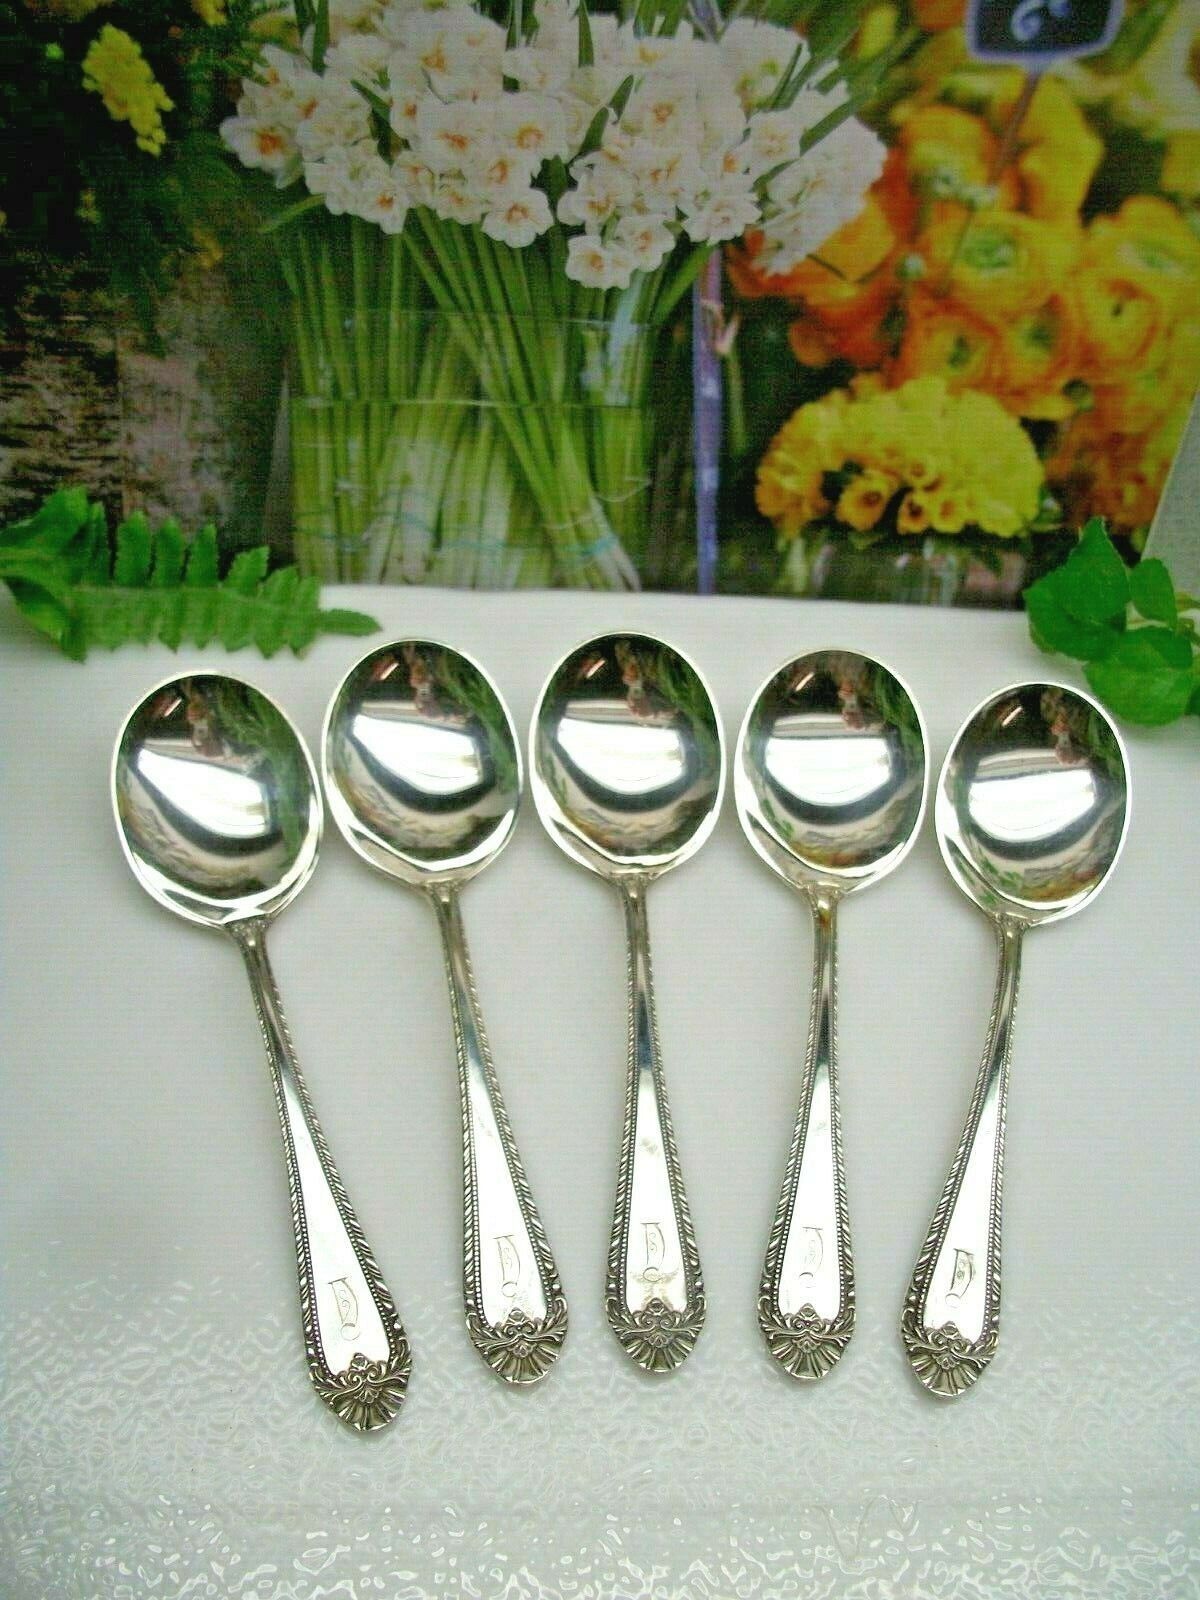 5  Reed & Barton  OLD LONDON   Silverplate  Round Cream Soup Spoons 1936   Mono Reed & Barton Silver